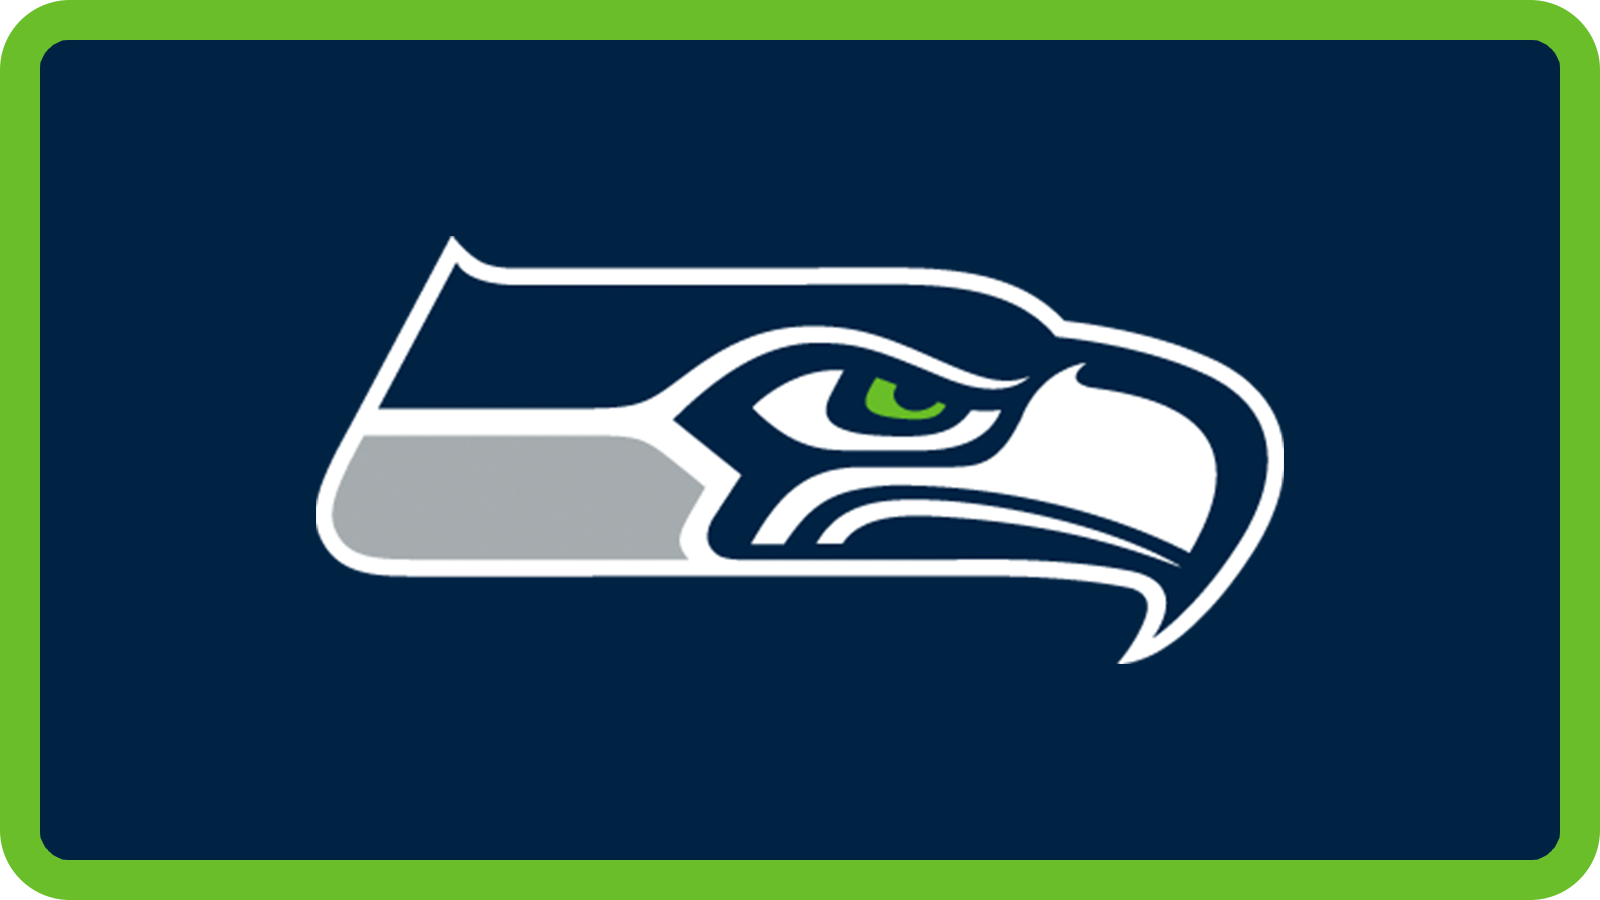 2023 Guide] How to Buy Cheap Seattle Seahawks Tickets